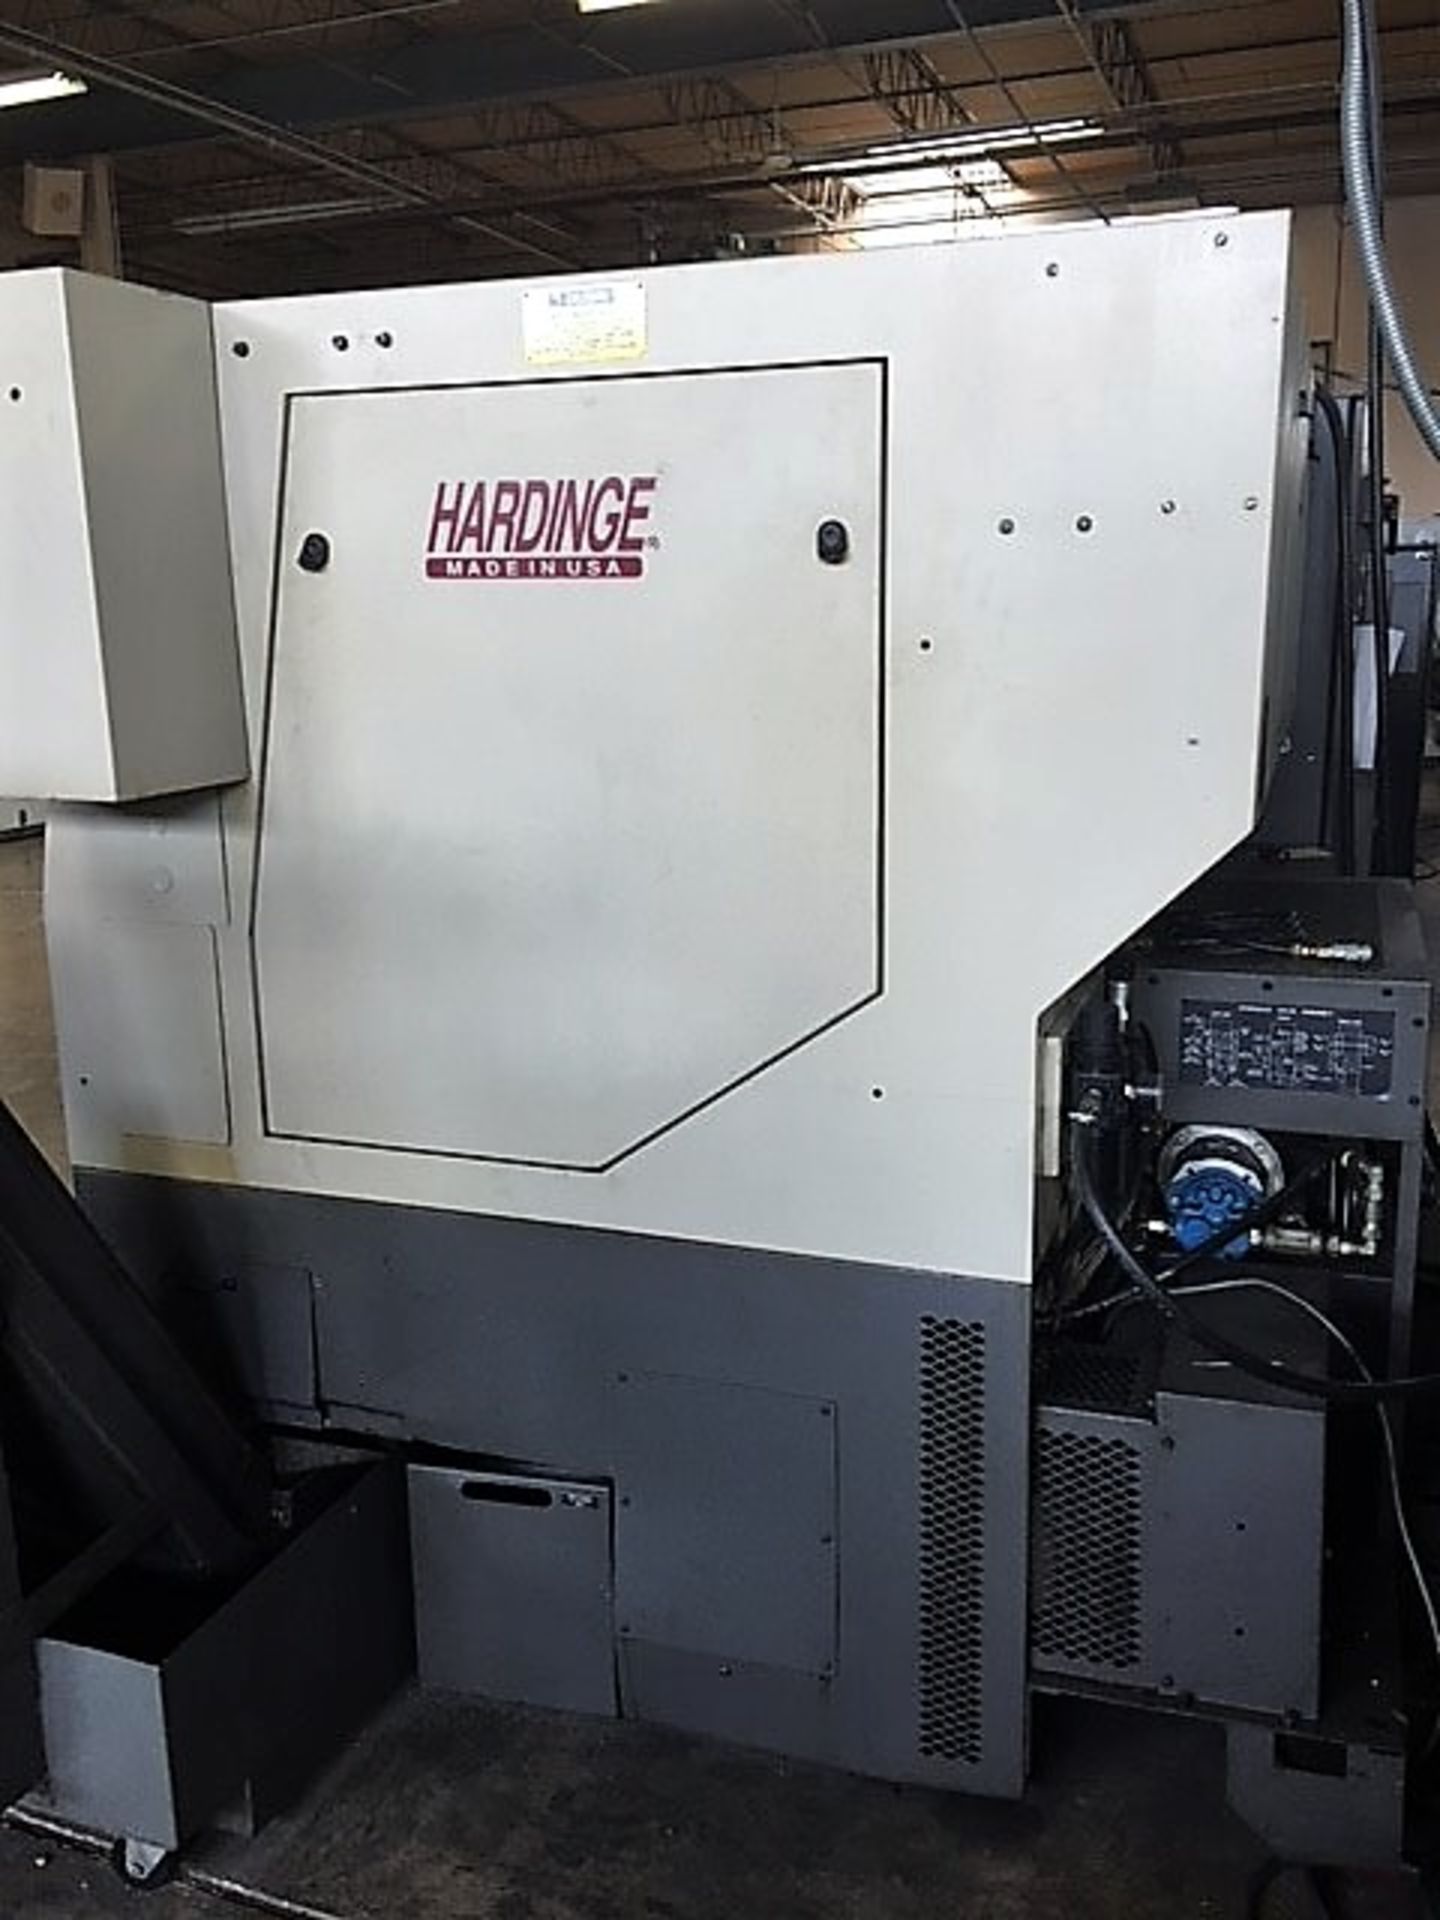 HARDINGE CONQUEST T51 CNC LATHE WITH LIVE TOOLING - Image 5 of 6